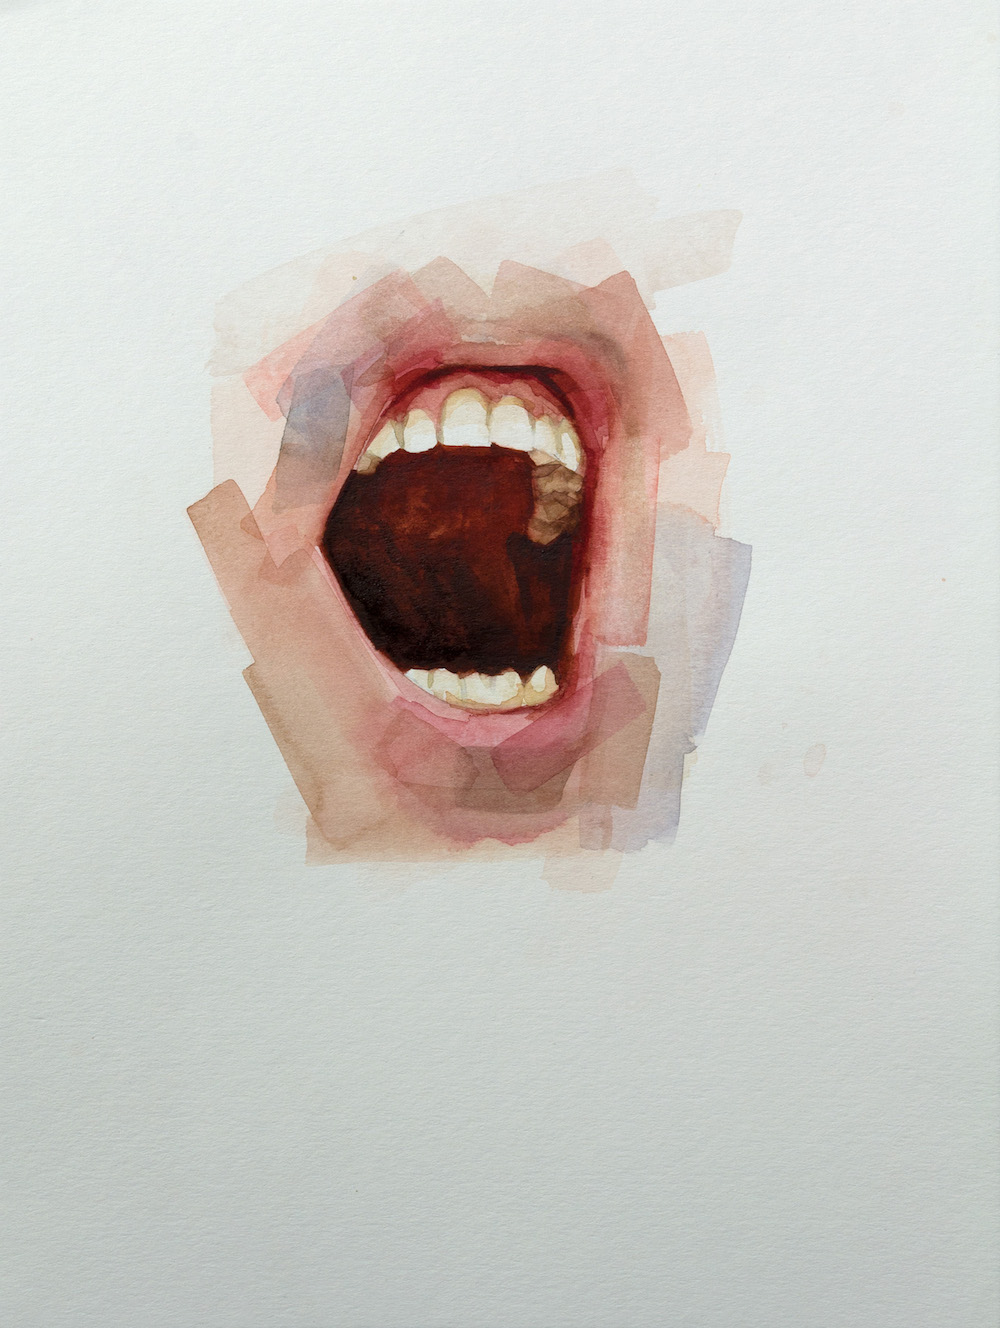   Mouth study   12 x 9 inches  watercolour on paper - SOLD    